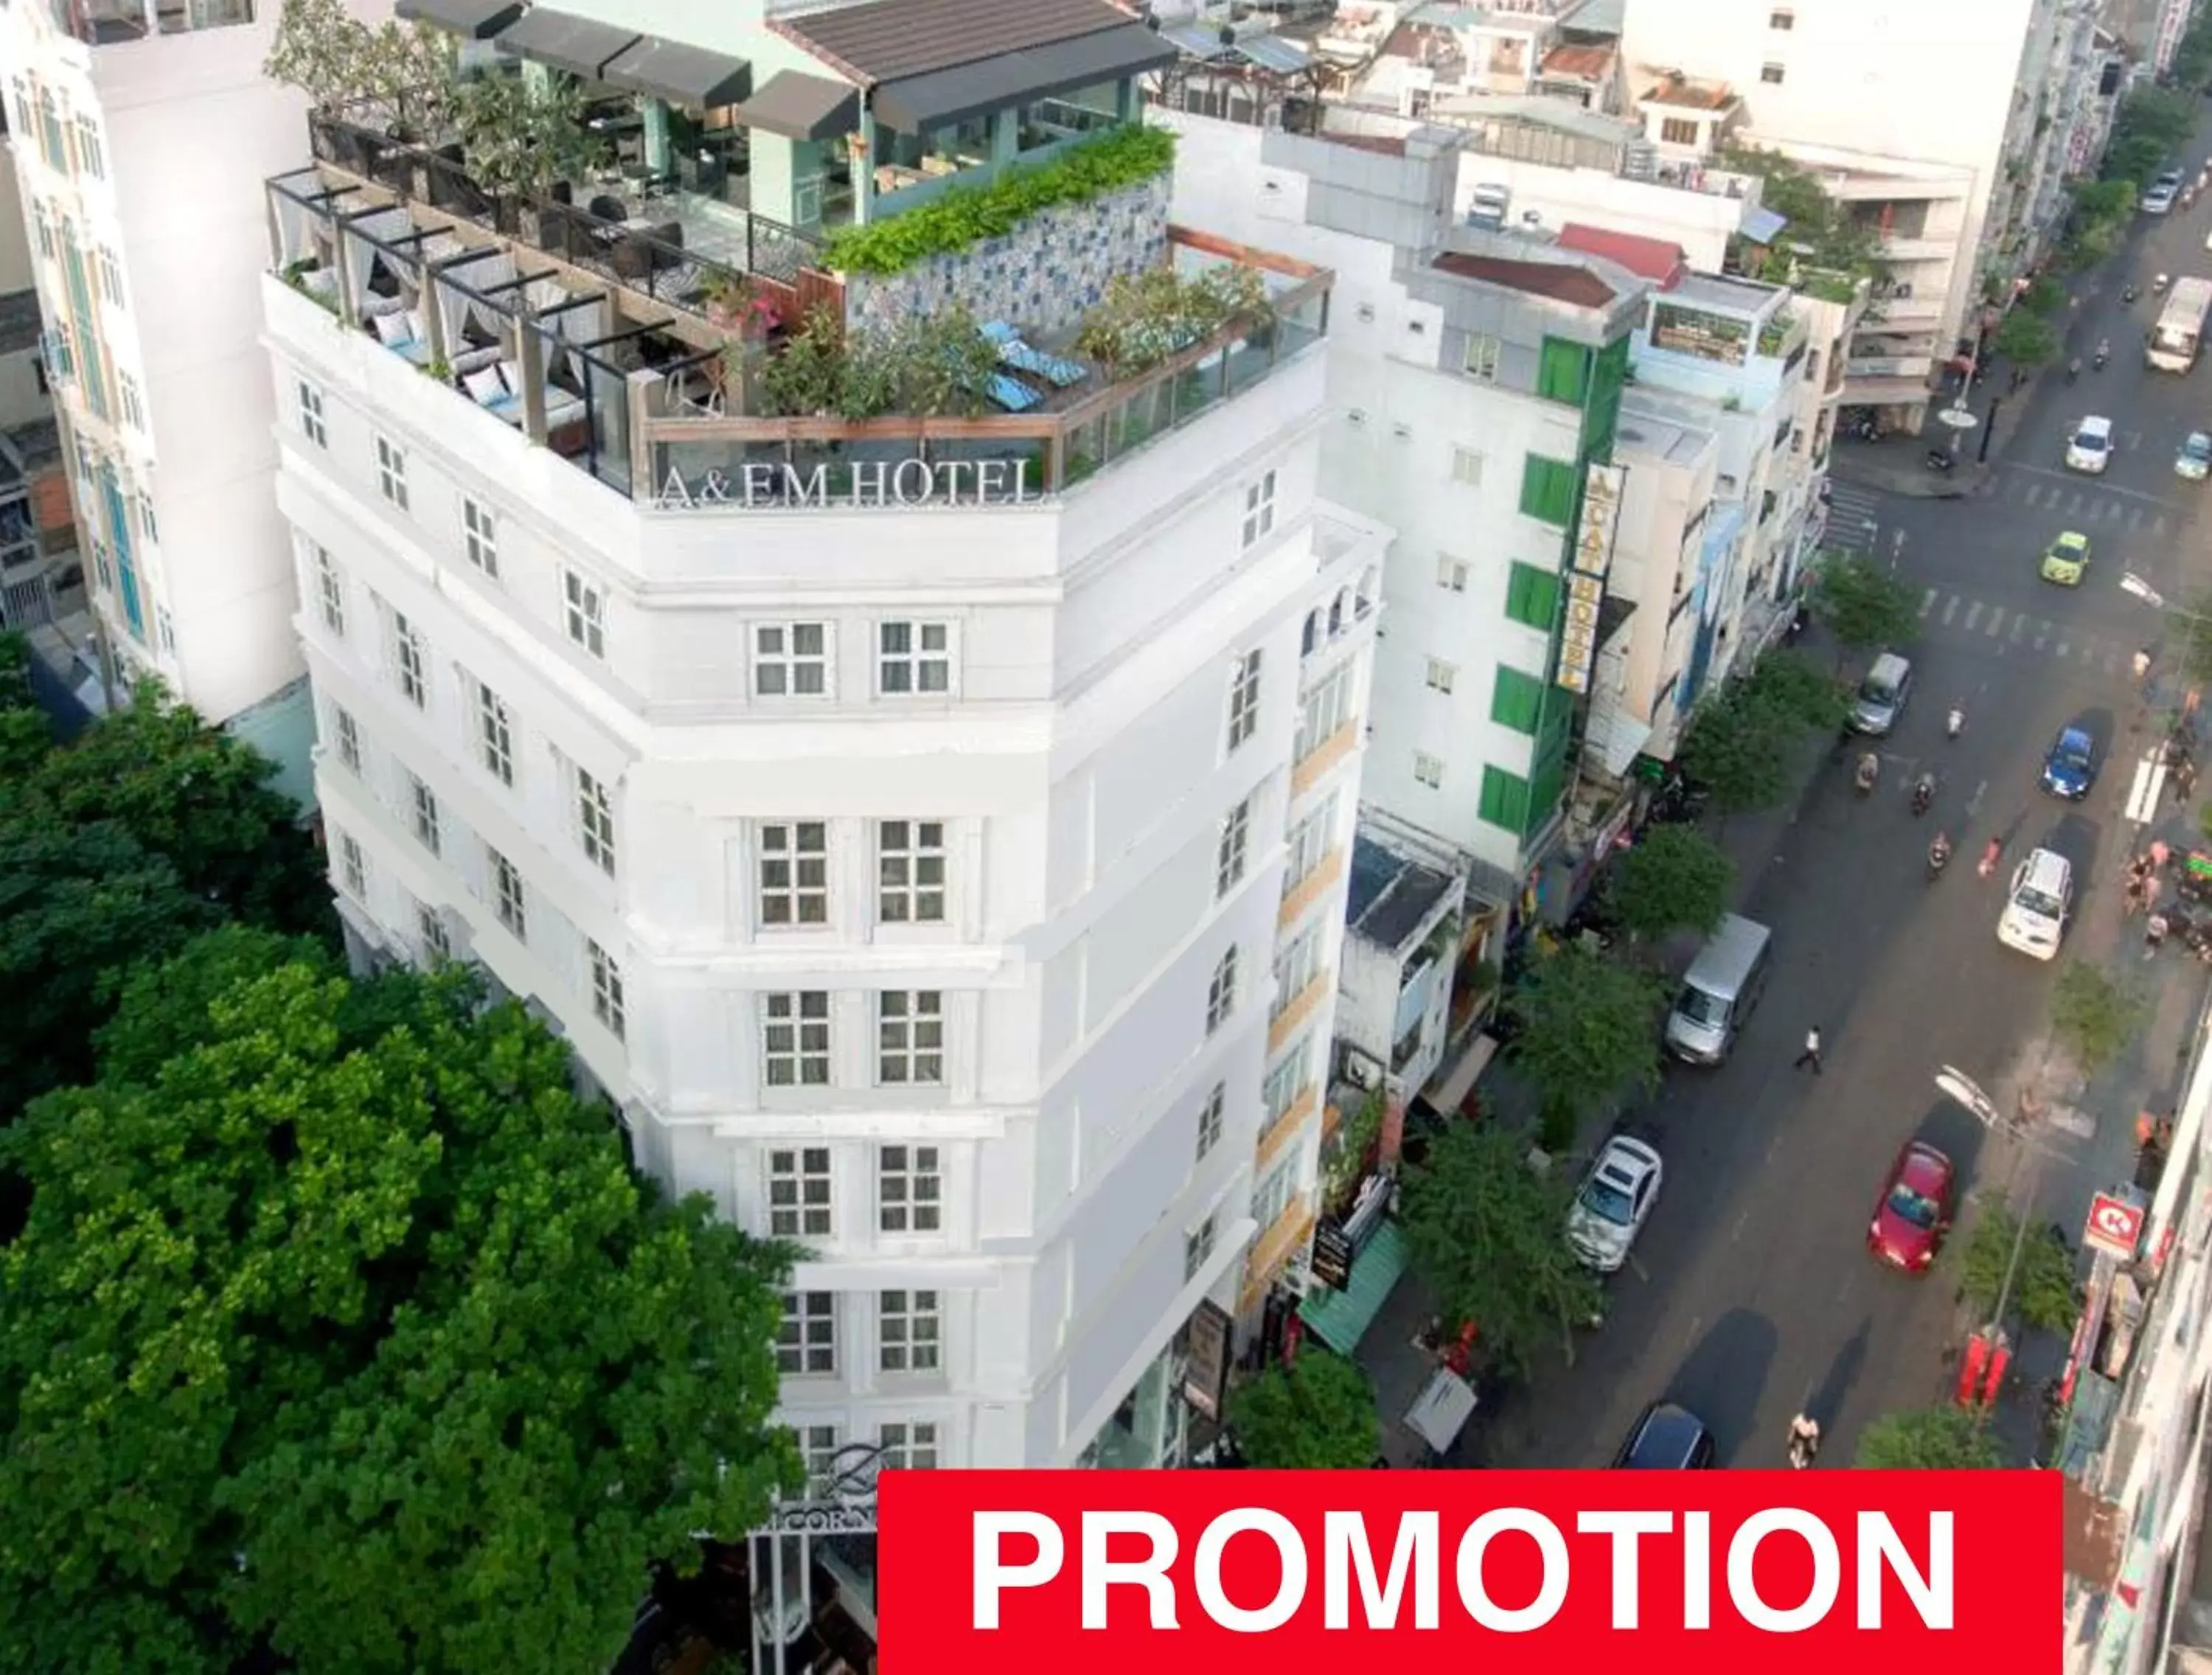 Property building, Bird's-eye View in A&EM 280 Le Thanh Ton Hotel & Spa